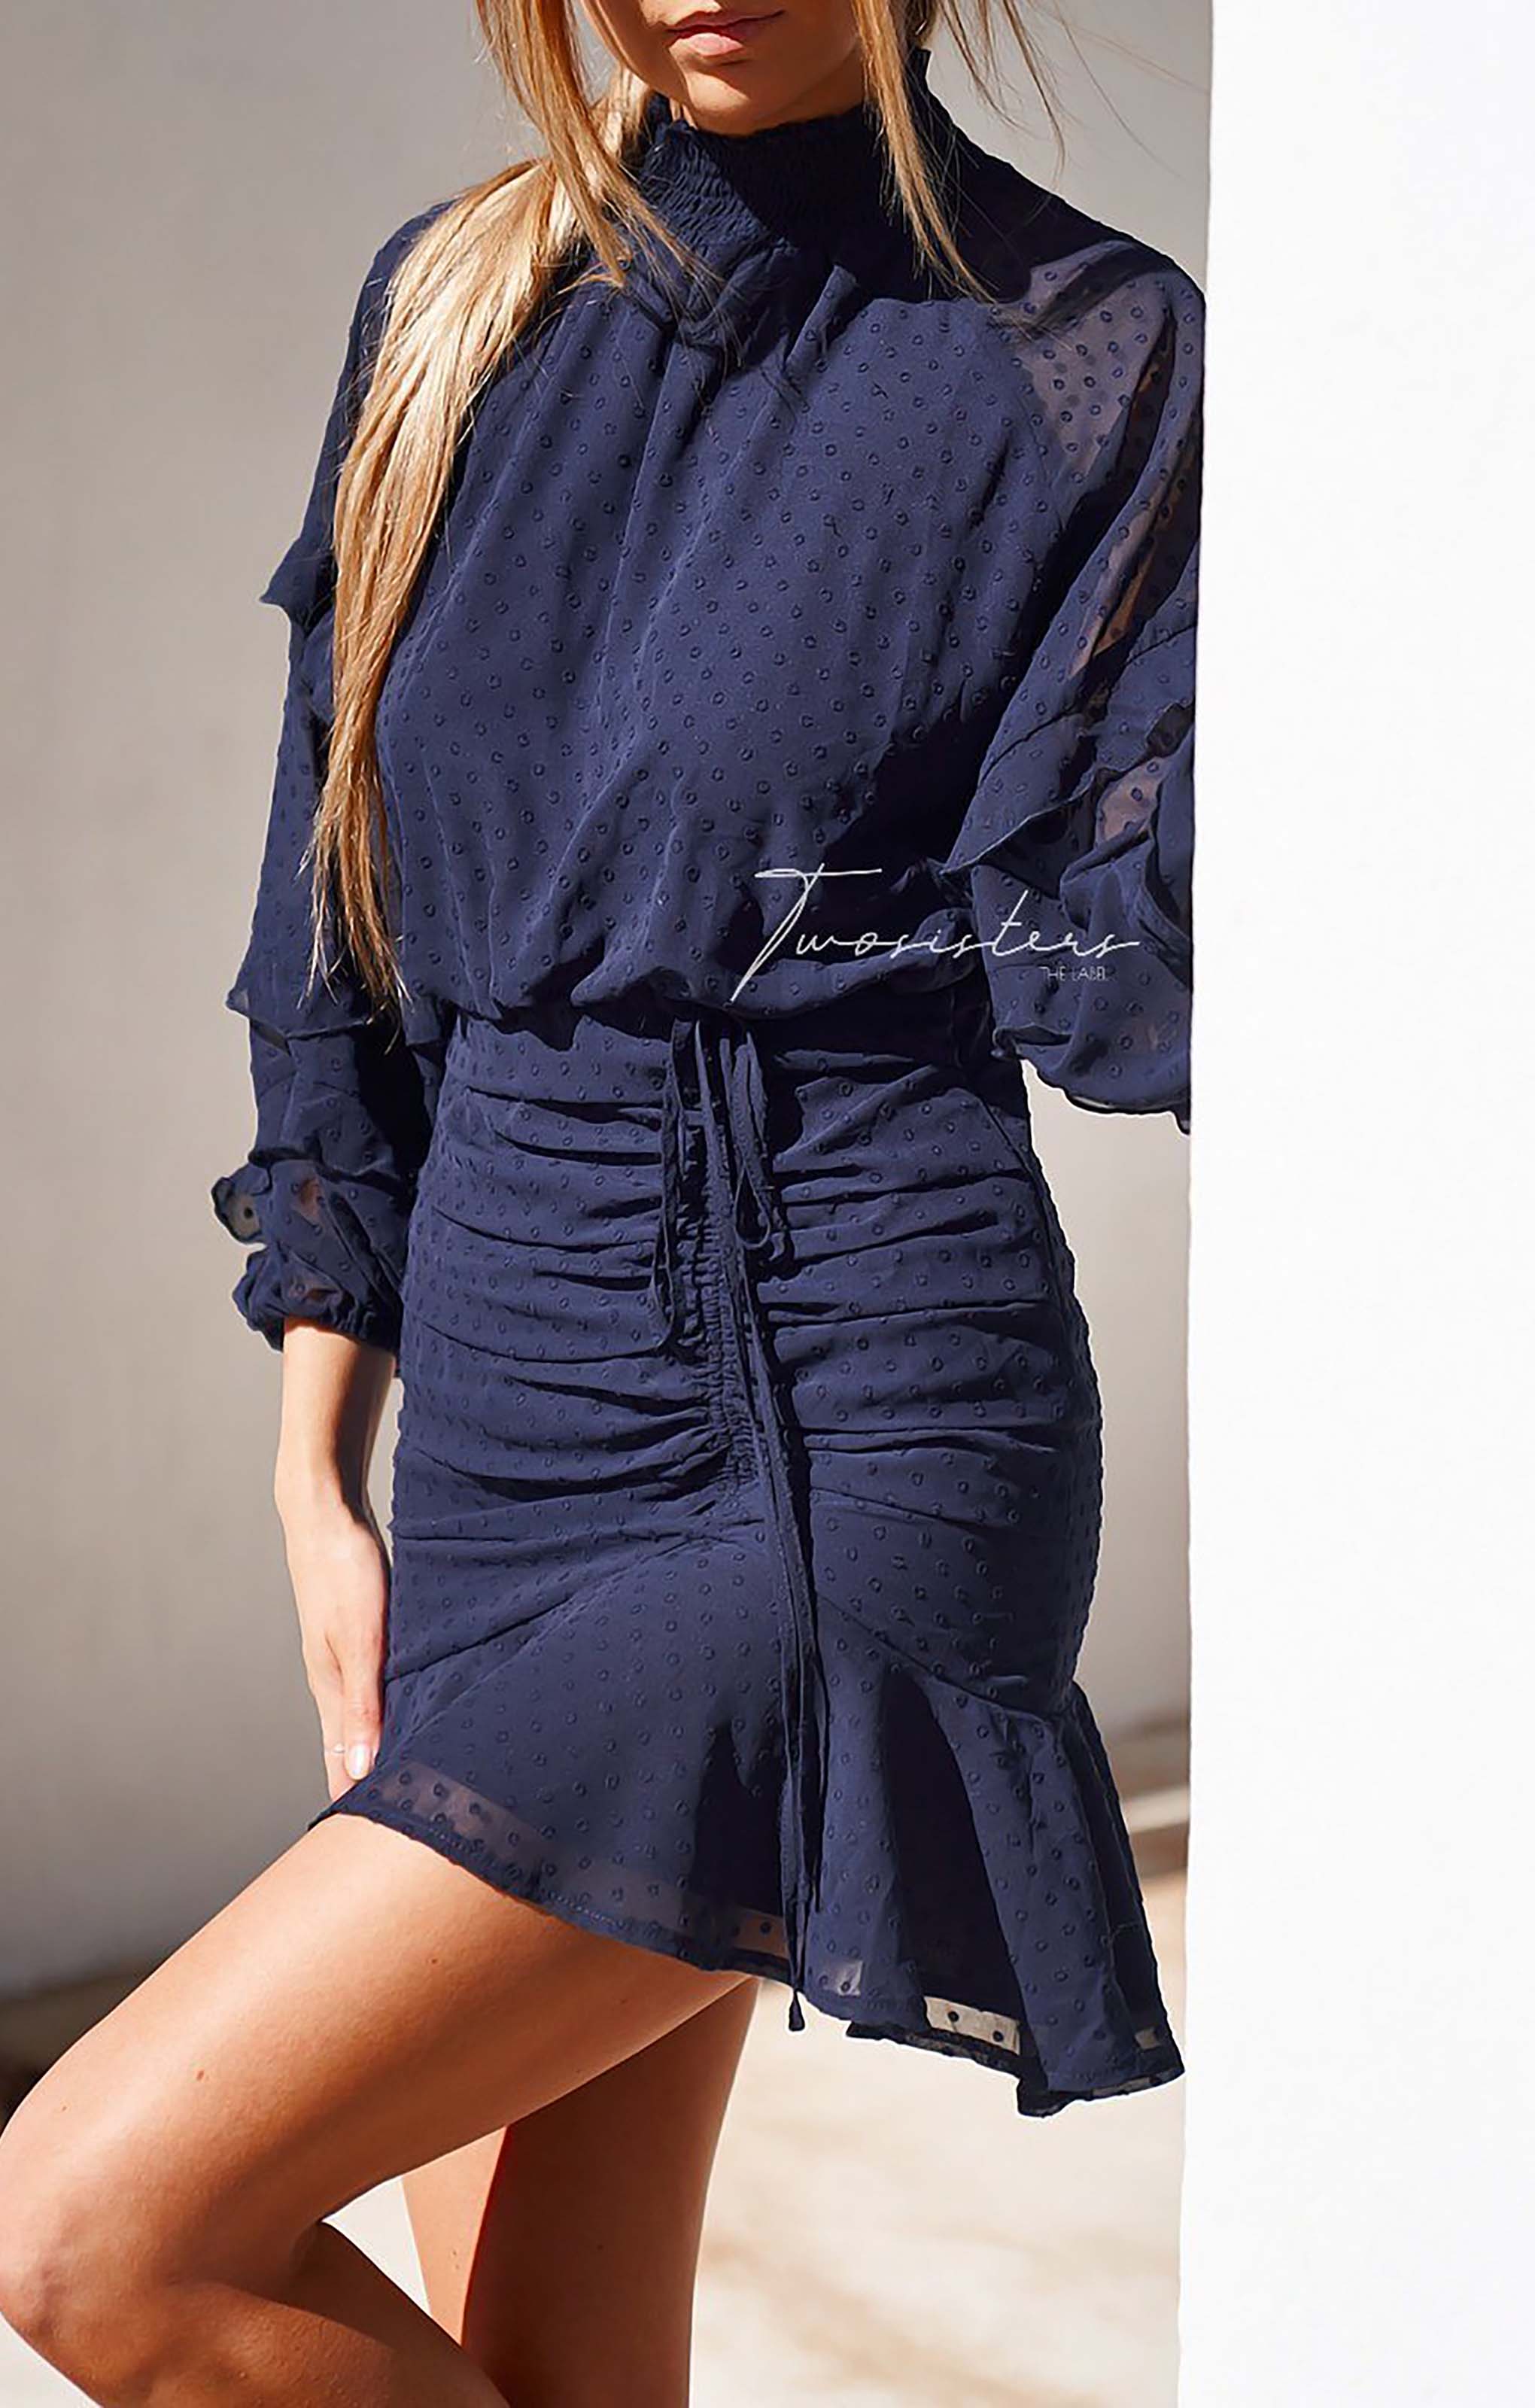 TwoSisters The Label Piper Dress In Navy product image